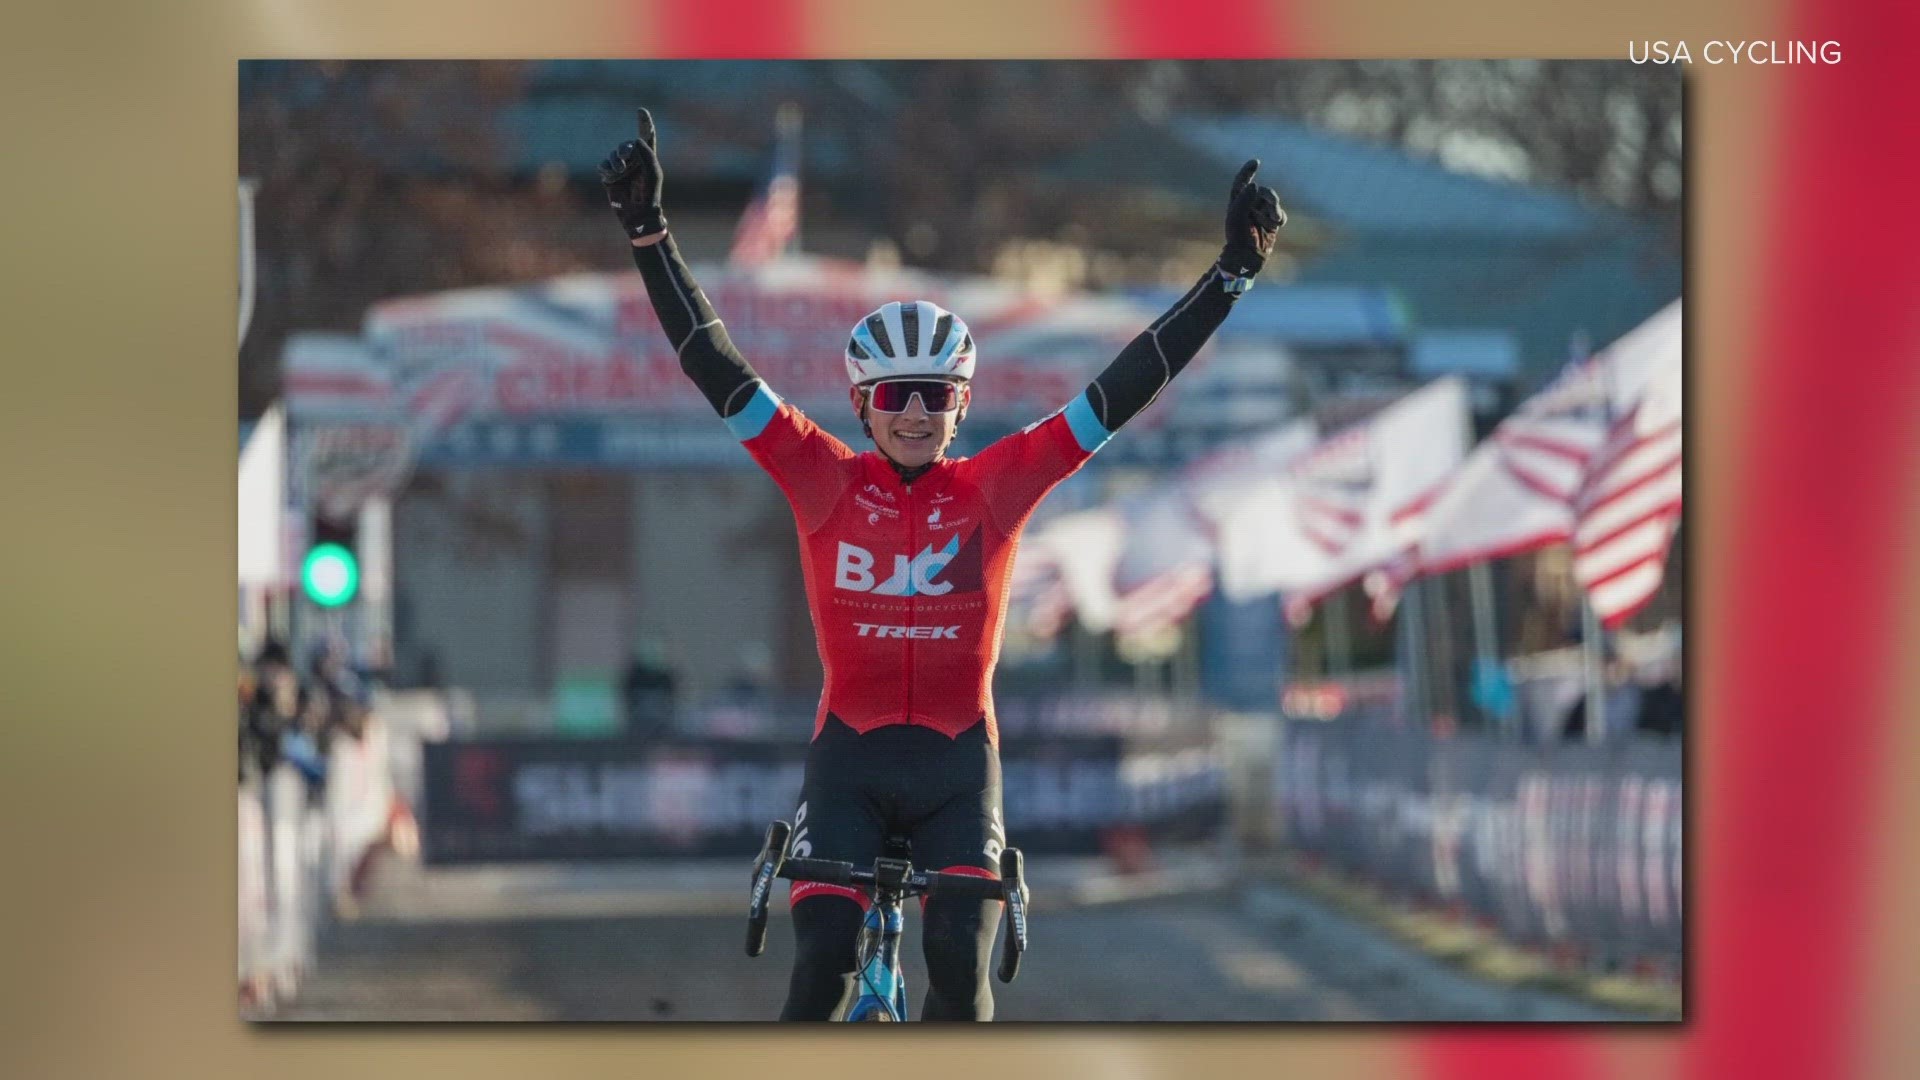 Prosecutors said Yeva Smilianska, 23, is facing a vehicular homicide charge in the July crash that killed 17-year-old National Team cyclist Magnus White.